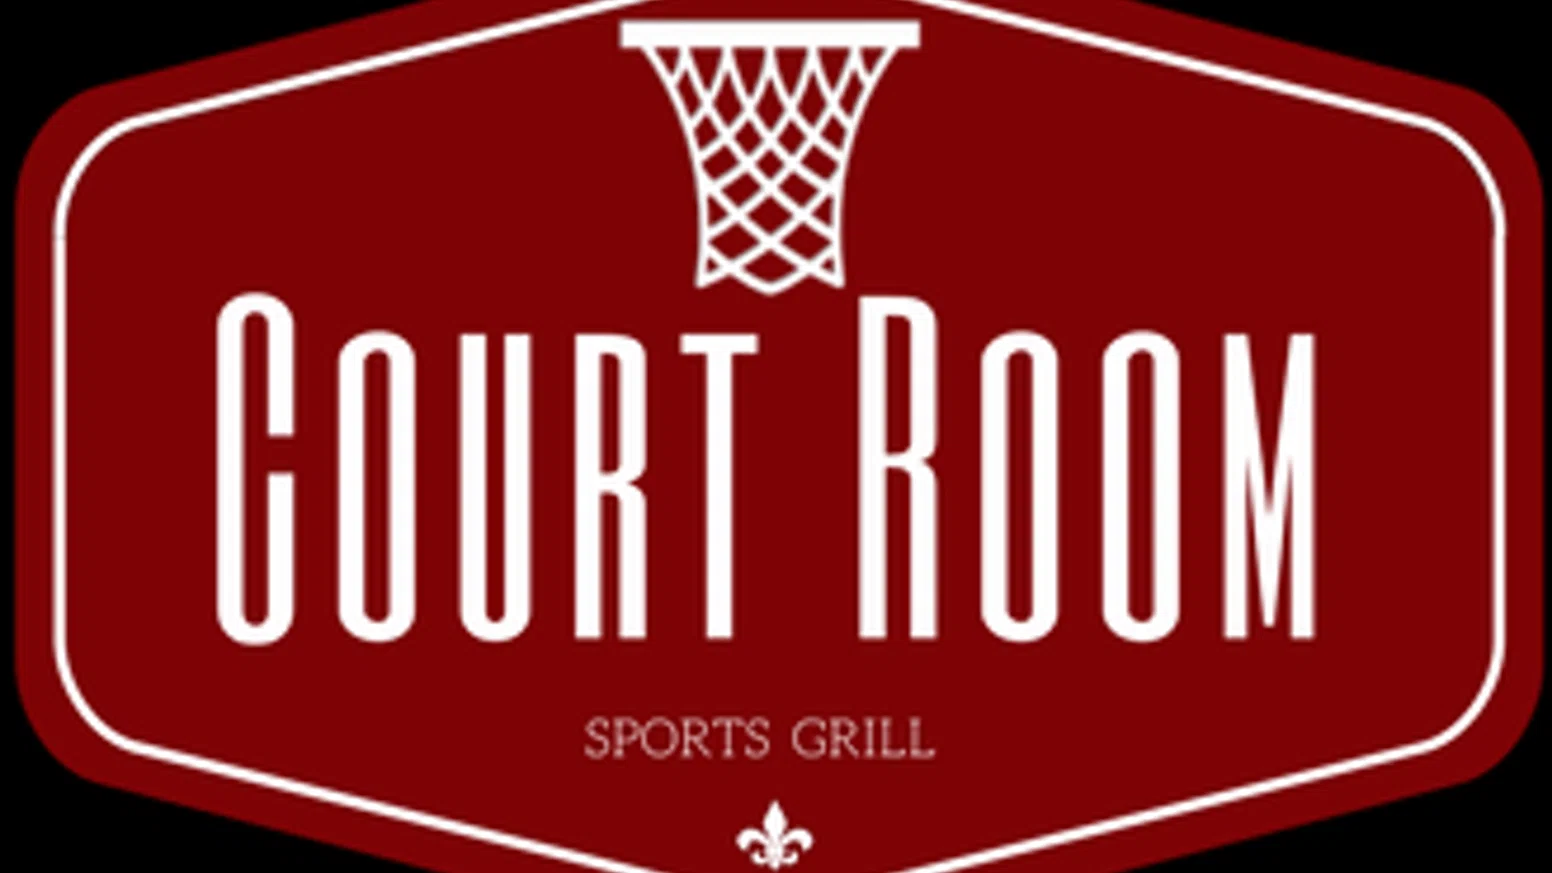 20% Off Court Room Sports Grill Promo Code Mar #39 24